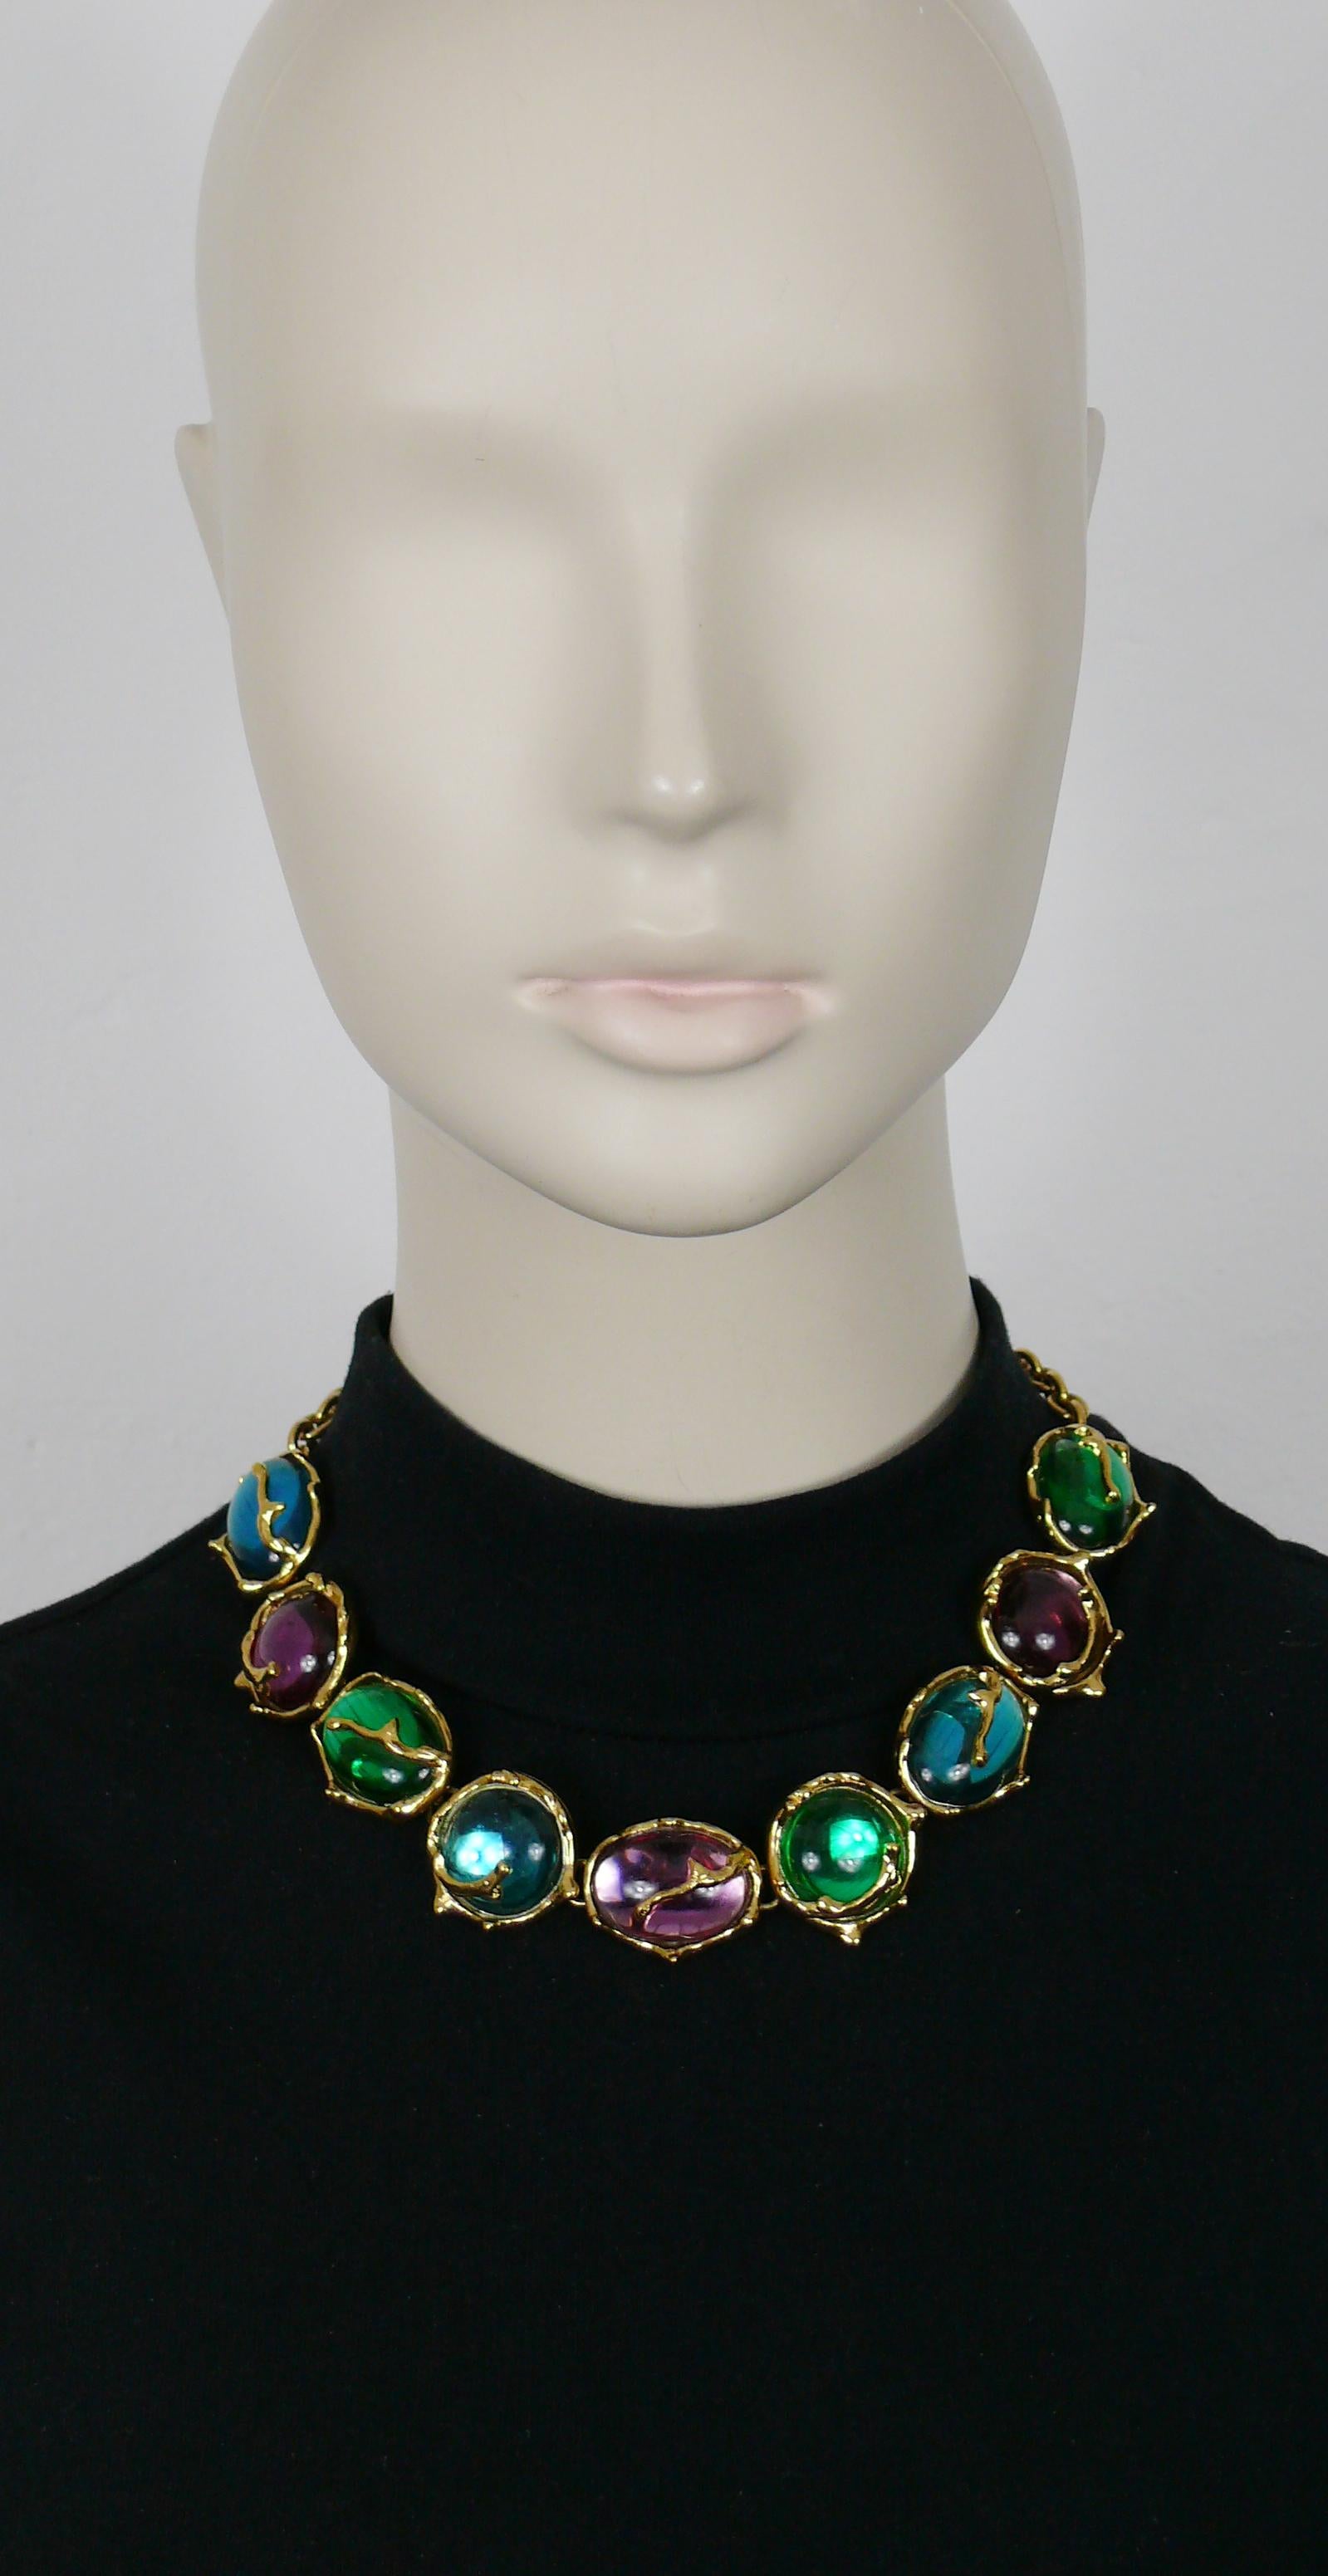 YVES SAINT LAURENT vintage gold tone necklace featuring round and oval multicolored (blue, purple, green) cabochons.

T bar and heart toggle closure.
Adjustable length.

Embossed YSL Made in France.
Cursive signature YVES SAINT LAURENT embossed on